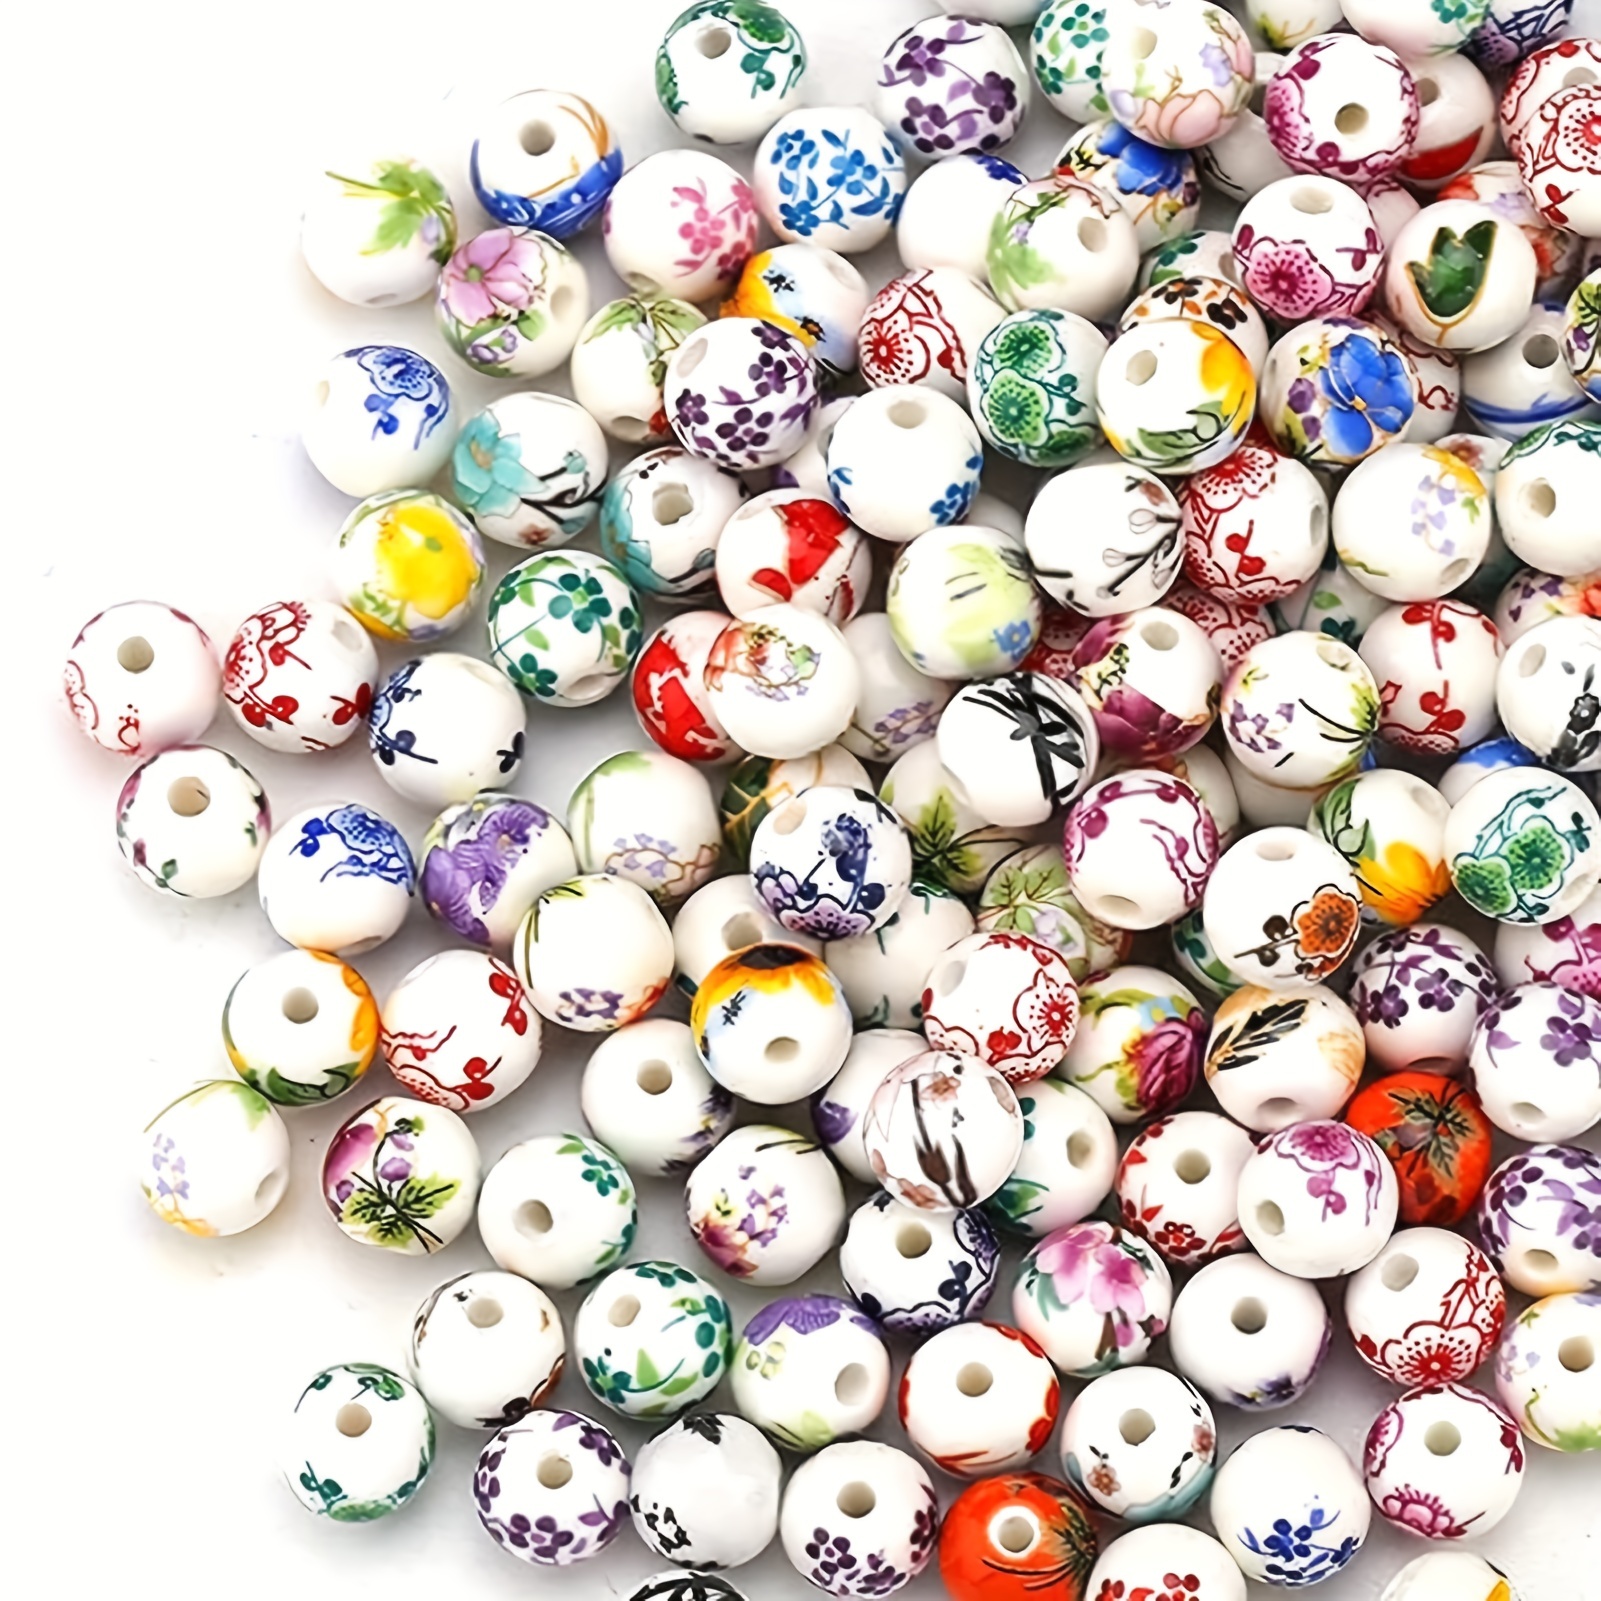 

50pcs Flower Ceramic Craft Beads Blue And White Porcelain Mixed Color Beads Set For Diy Mobile Phone Chain Necklace Bracelet (8mm 10mm) Jewelry Making Supplies